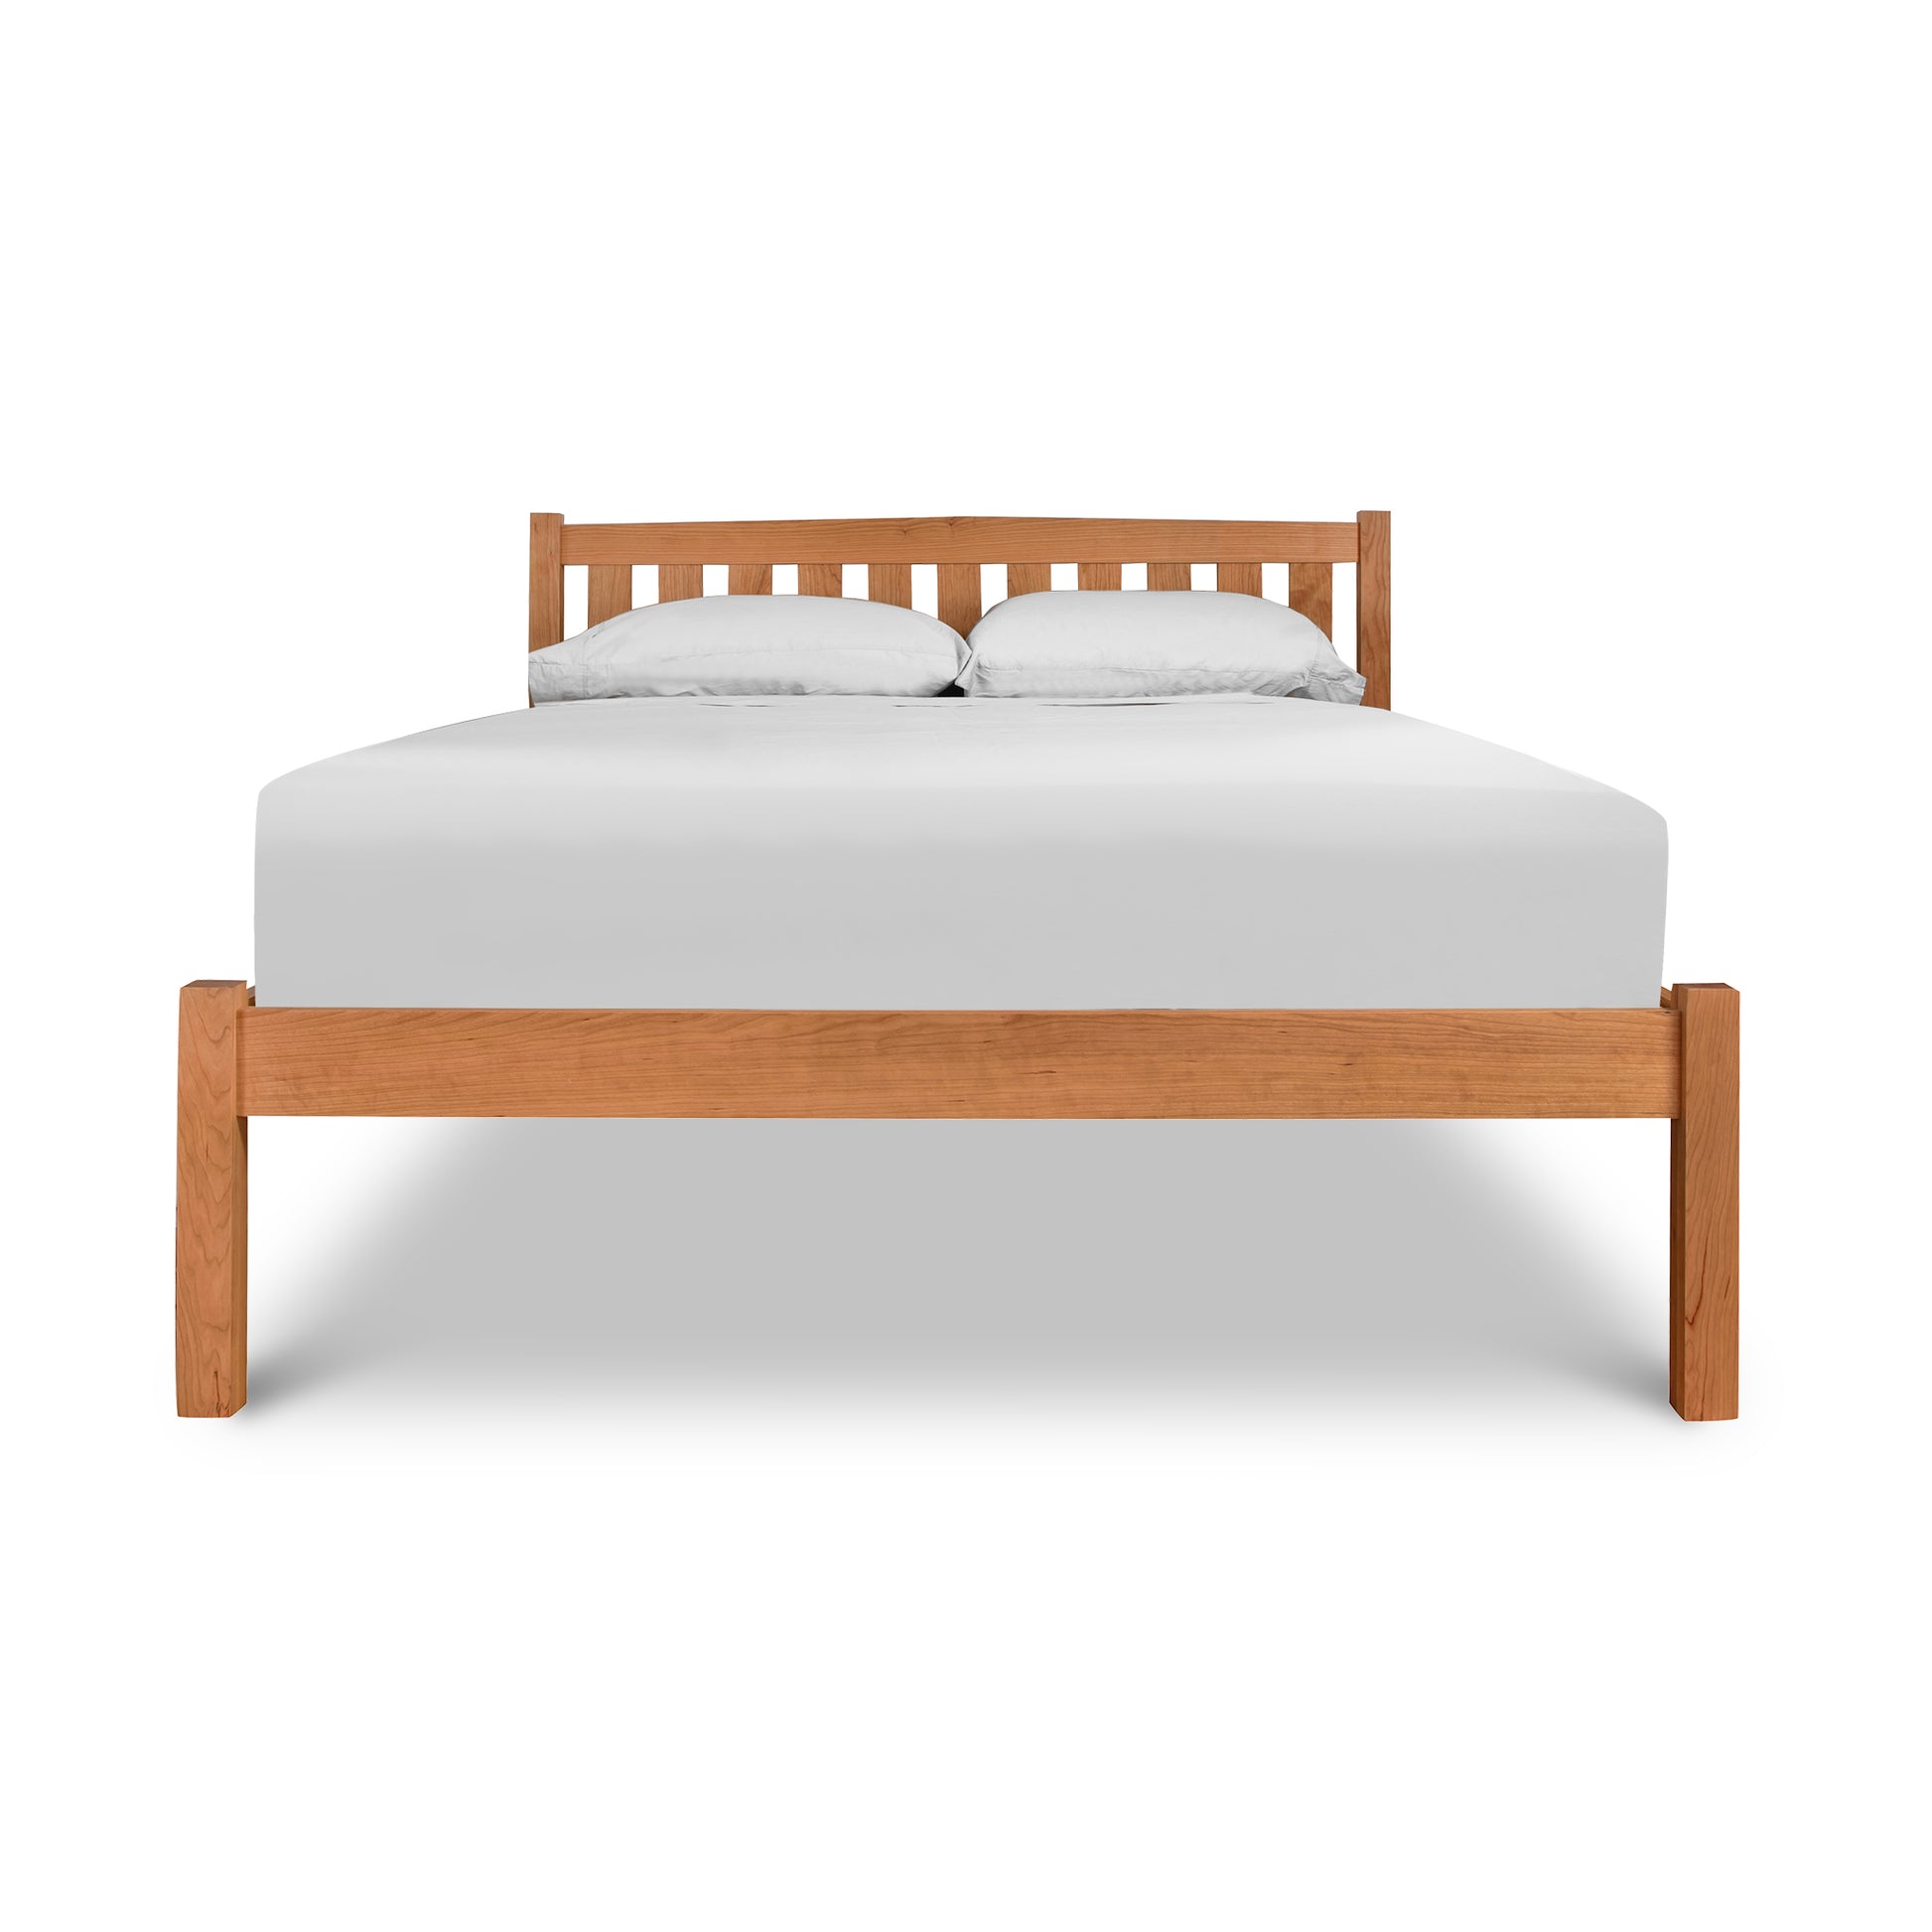 A Vermont Furniture Designs Bennington Bed with Low Footboard in cherry walnut wood, paired with a white mattress and two pillows against a white background.